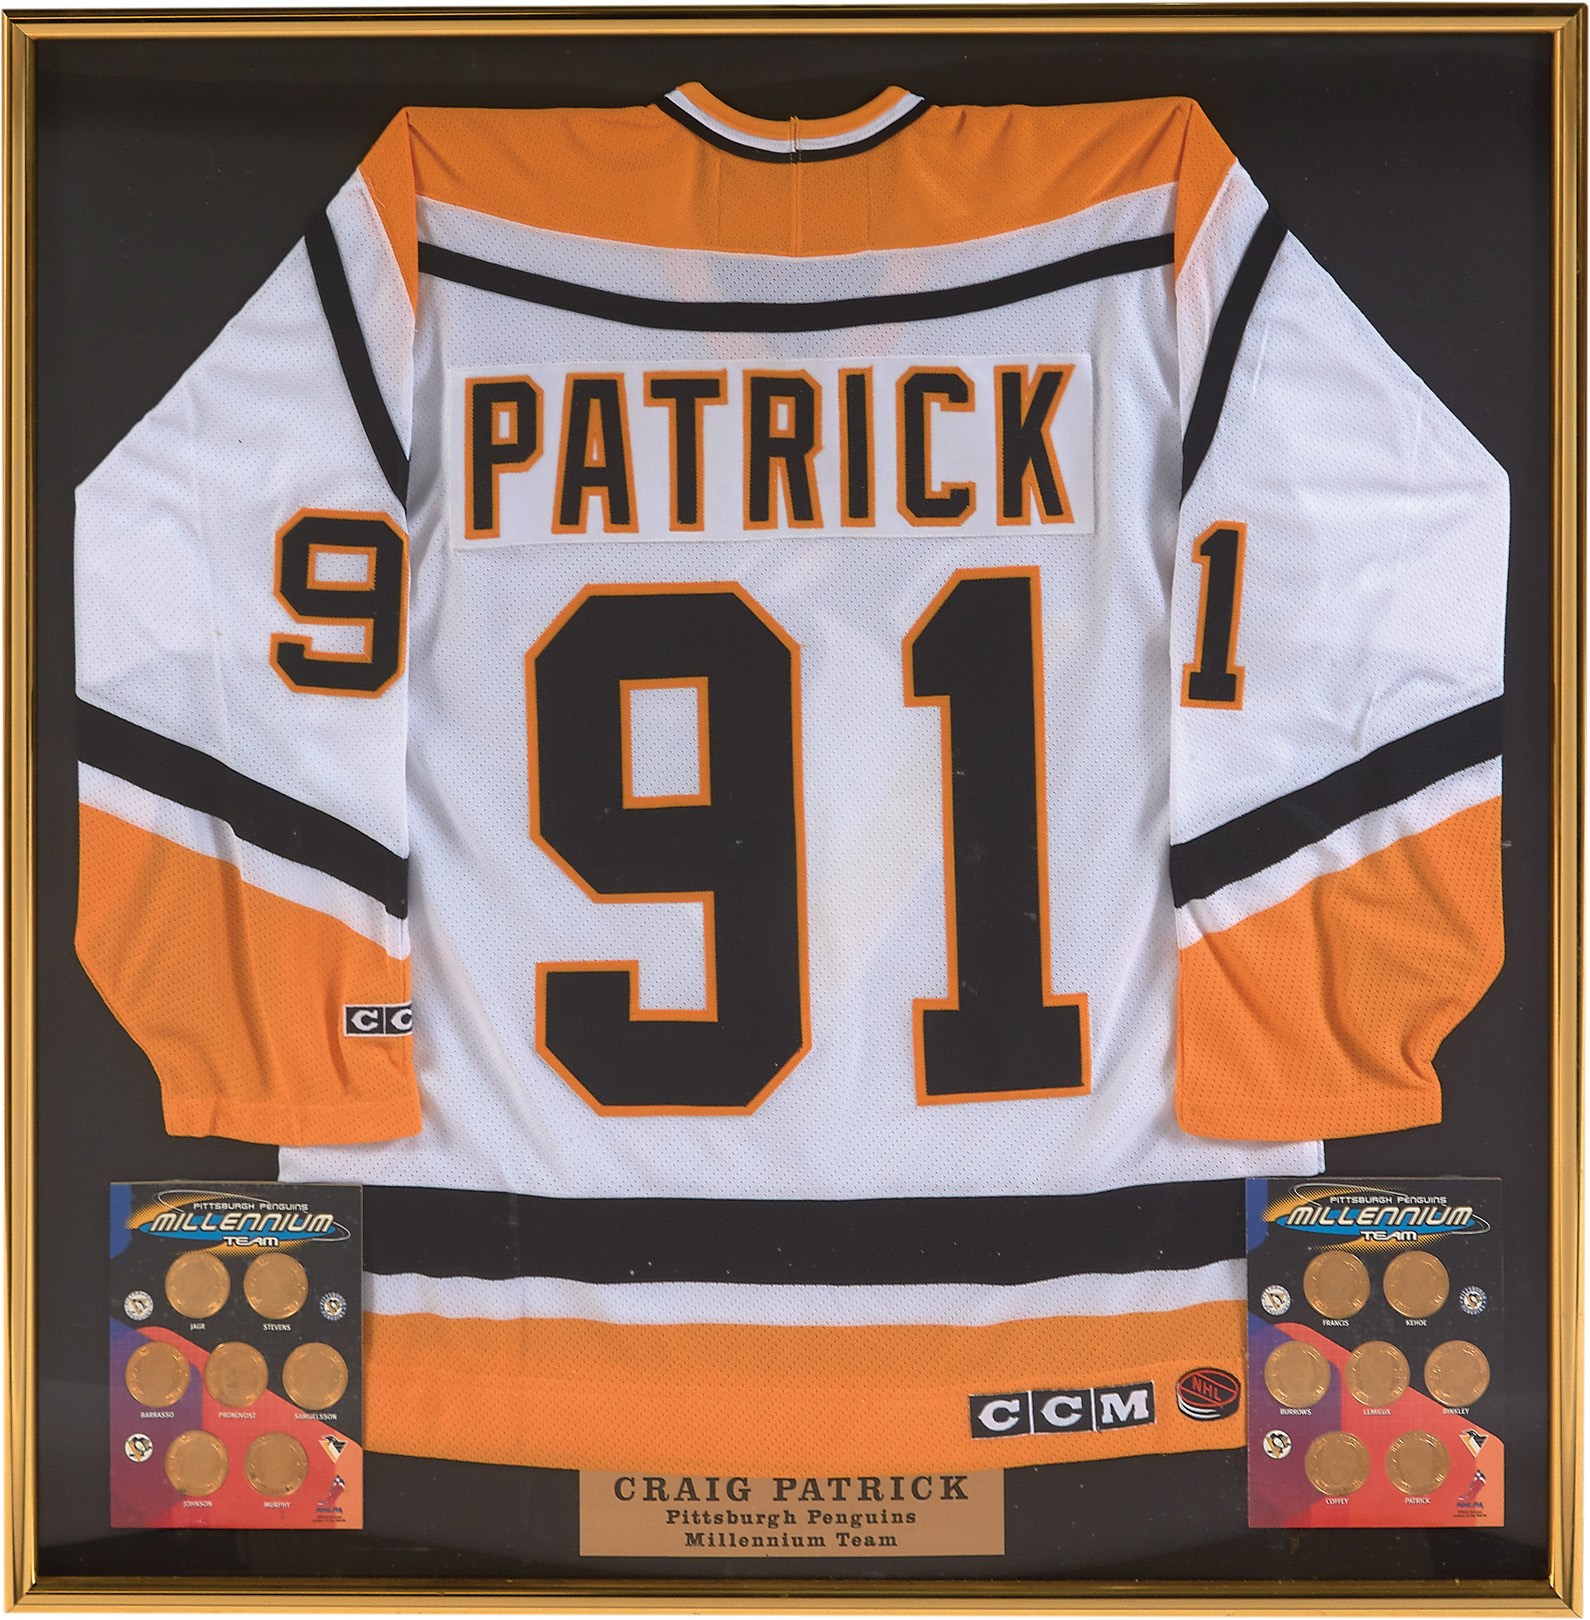 The Craig Patrick Hockey Collection - Pittsburgh Penguins Millenium Team Framed Display Presented to Craig Patrick